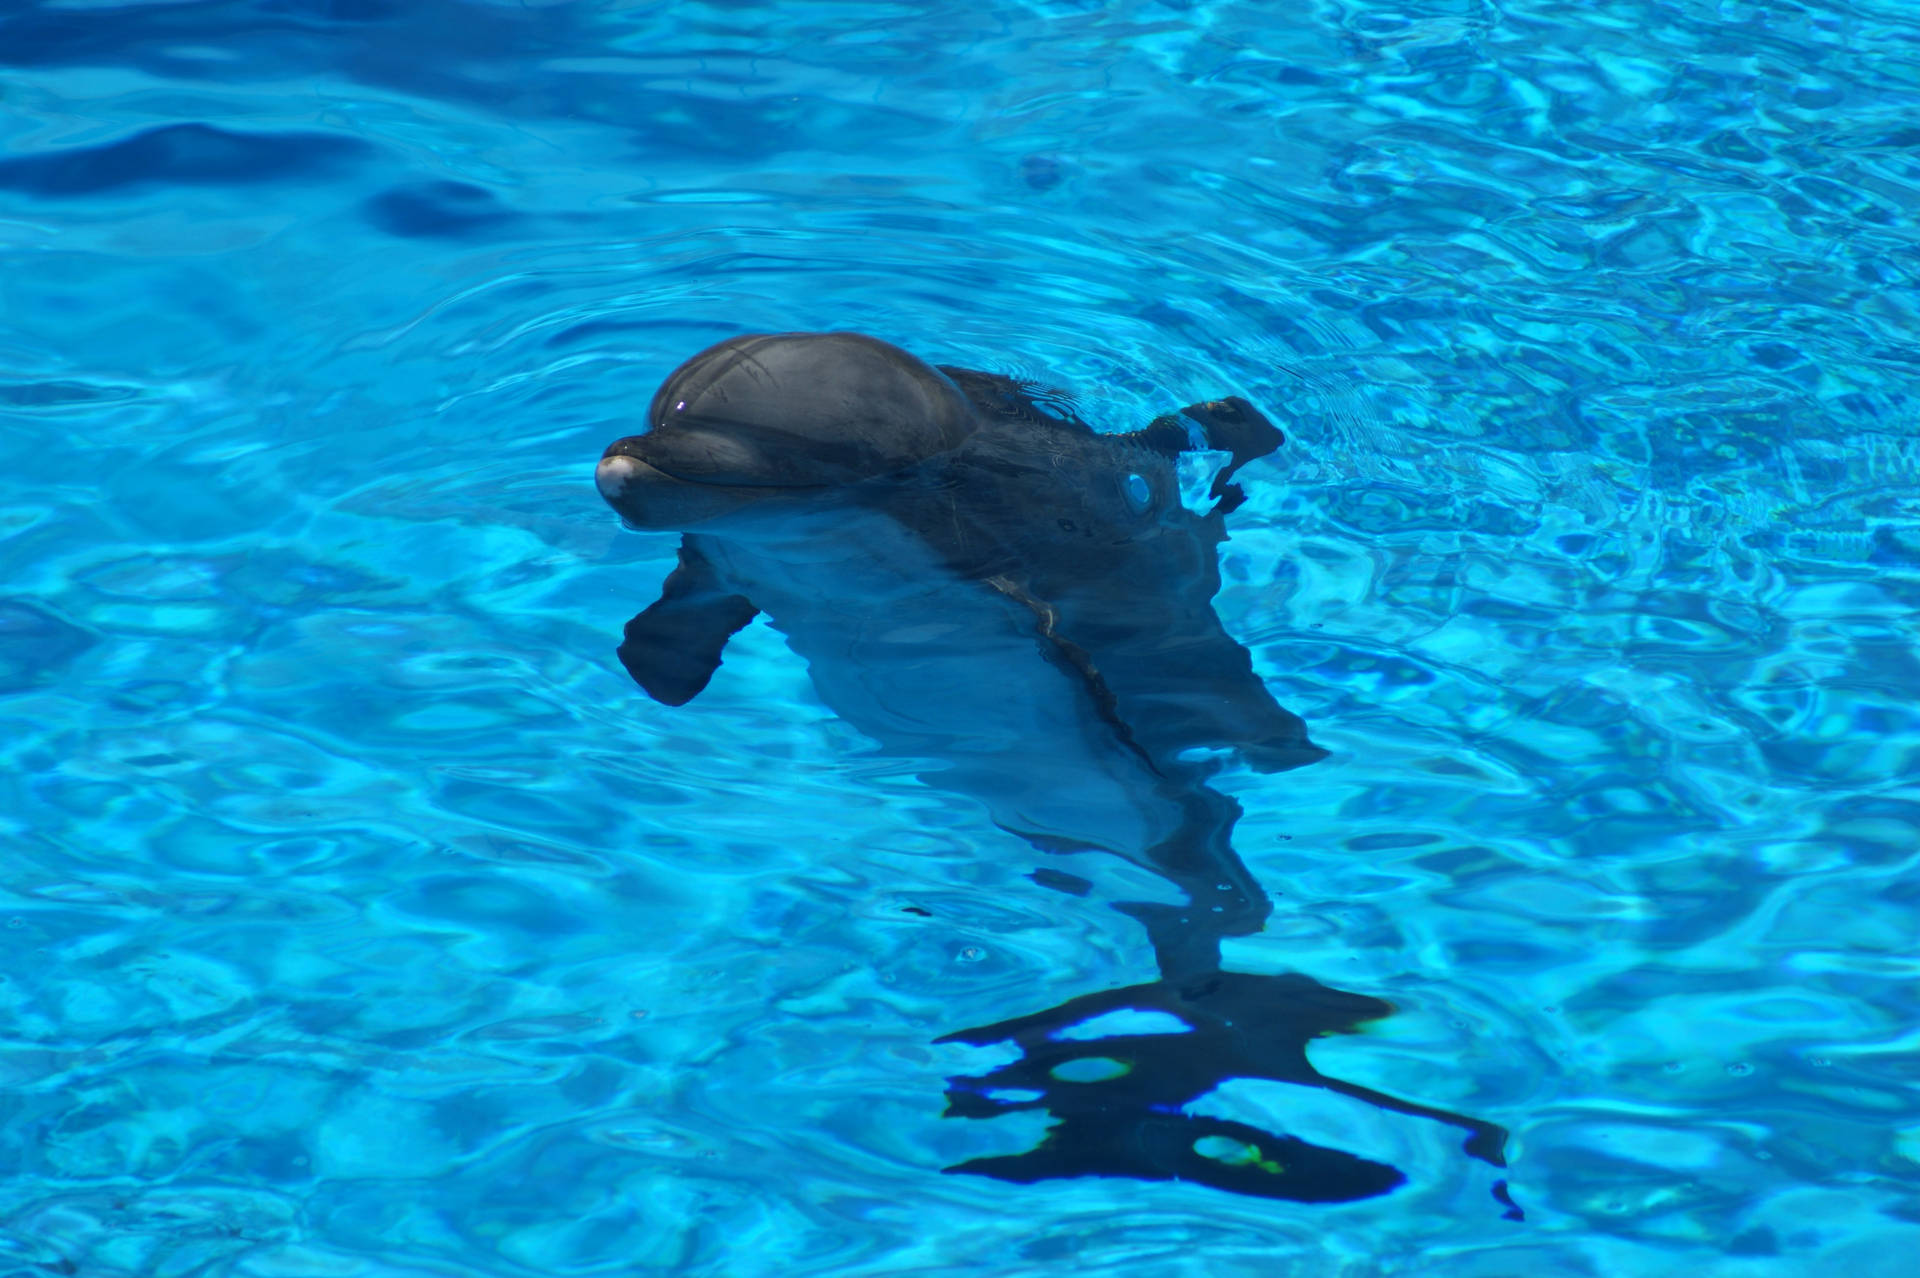 Dolphin 4592X3056 Wallpaper and Background Image